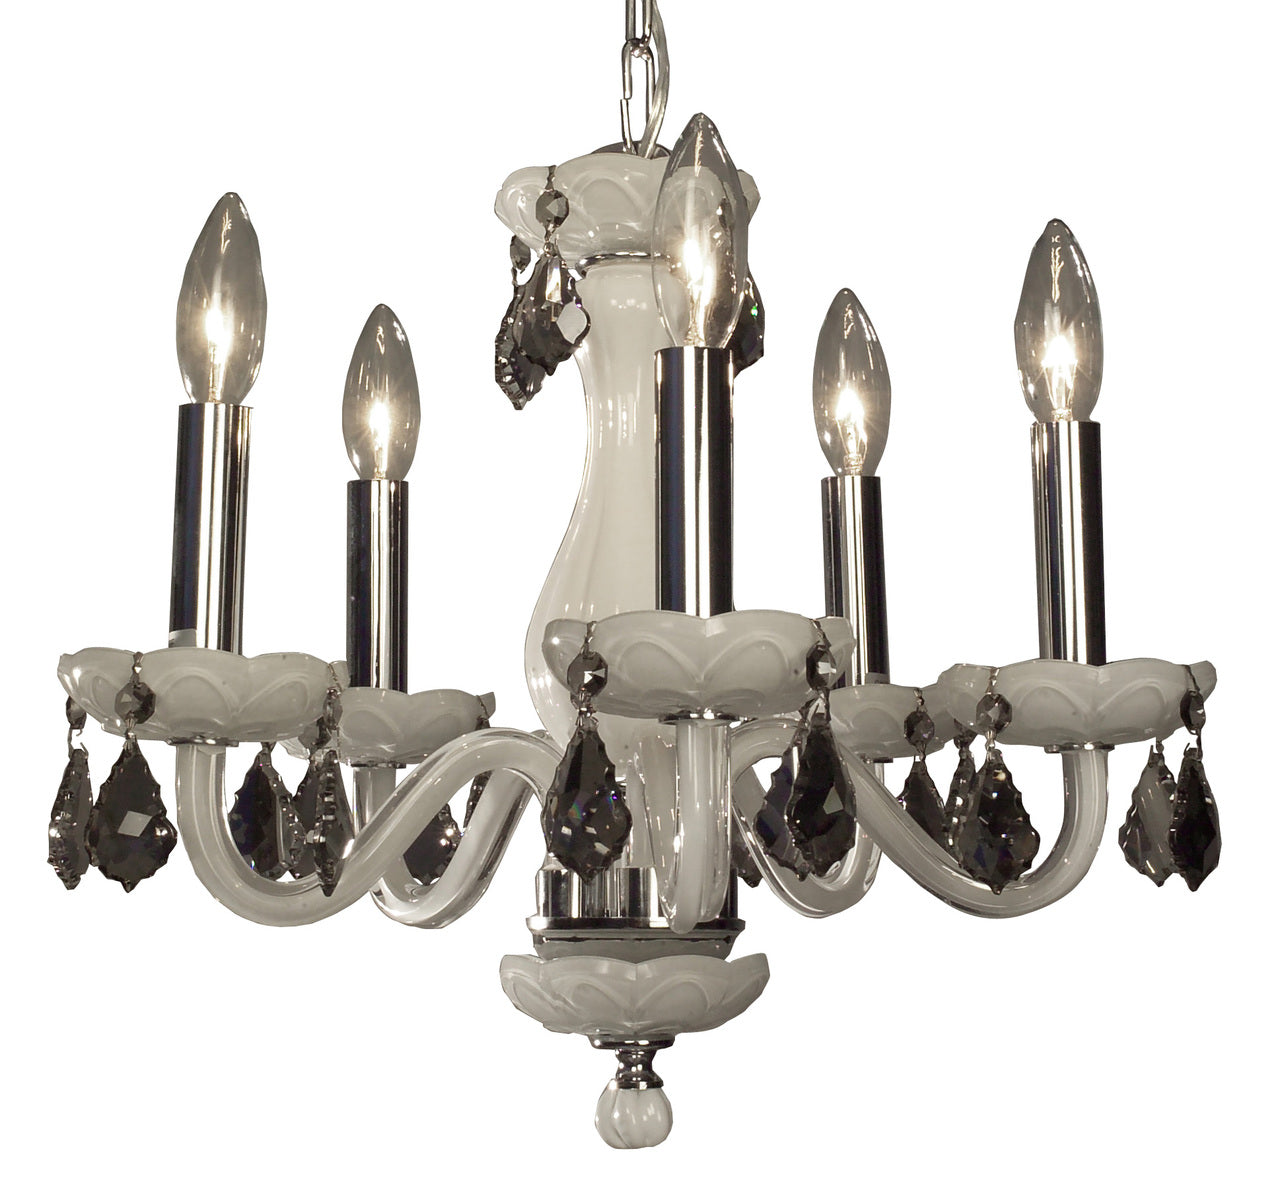 Classic Lighting 82045 WHT SPR Monaco Crystal Chandelier in White (Imported from Spain)